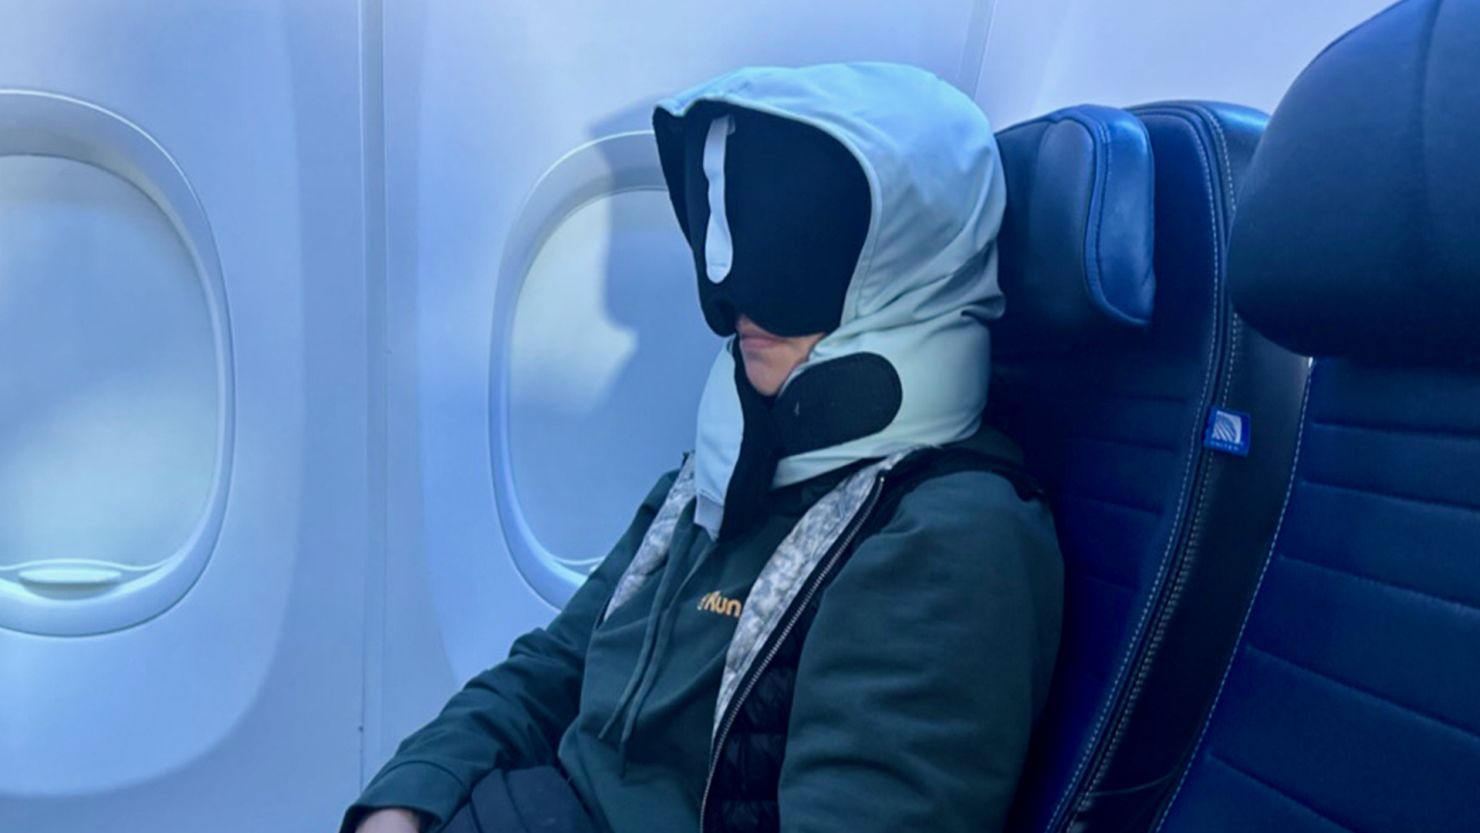 Gear Review: Fly Legs Up with the 1st Class Kid Travel Pillow